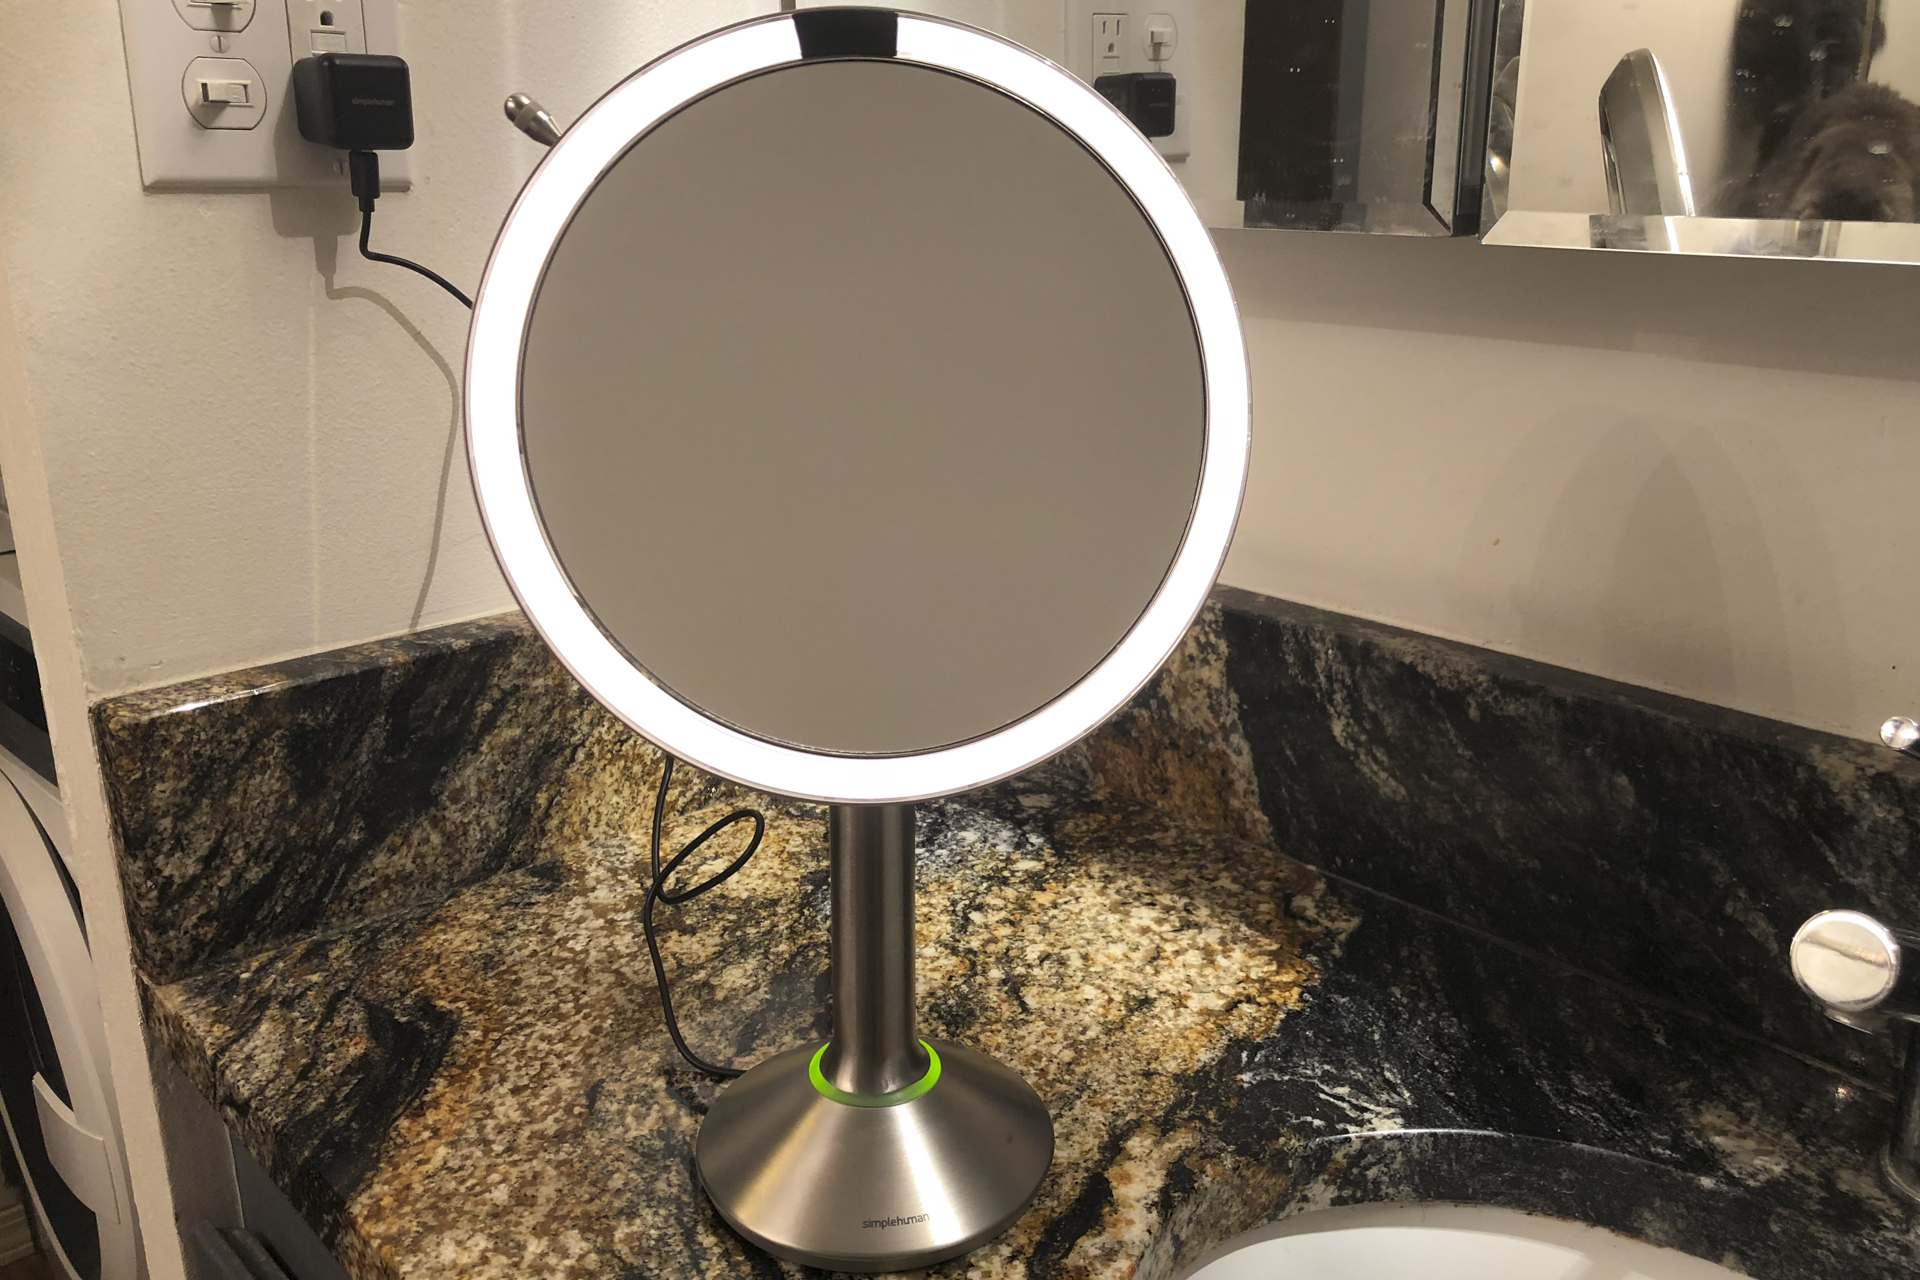 https://www.digitaltrends.com/wp-content/uploads/2018/08/living-with-smart-mirrors-3698.jpg?fit=1920%2C1280&p=1